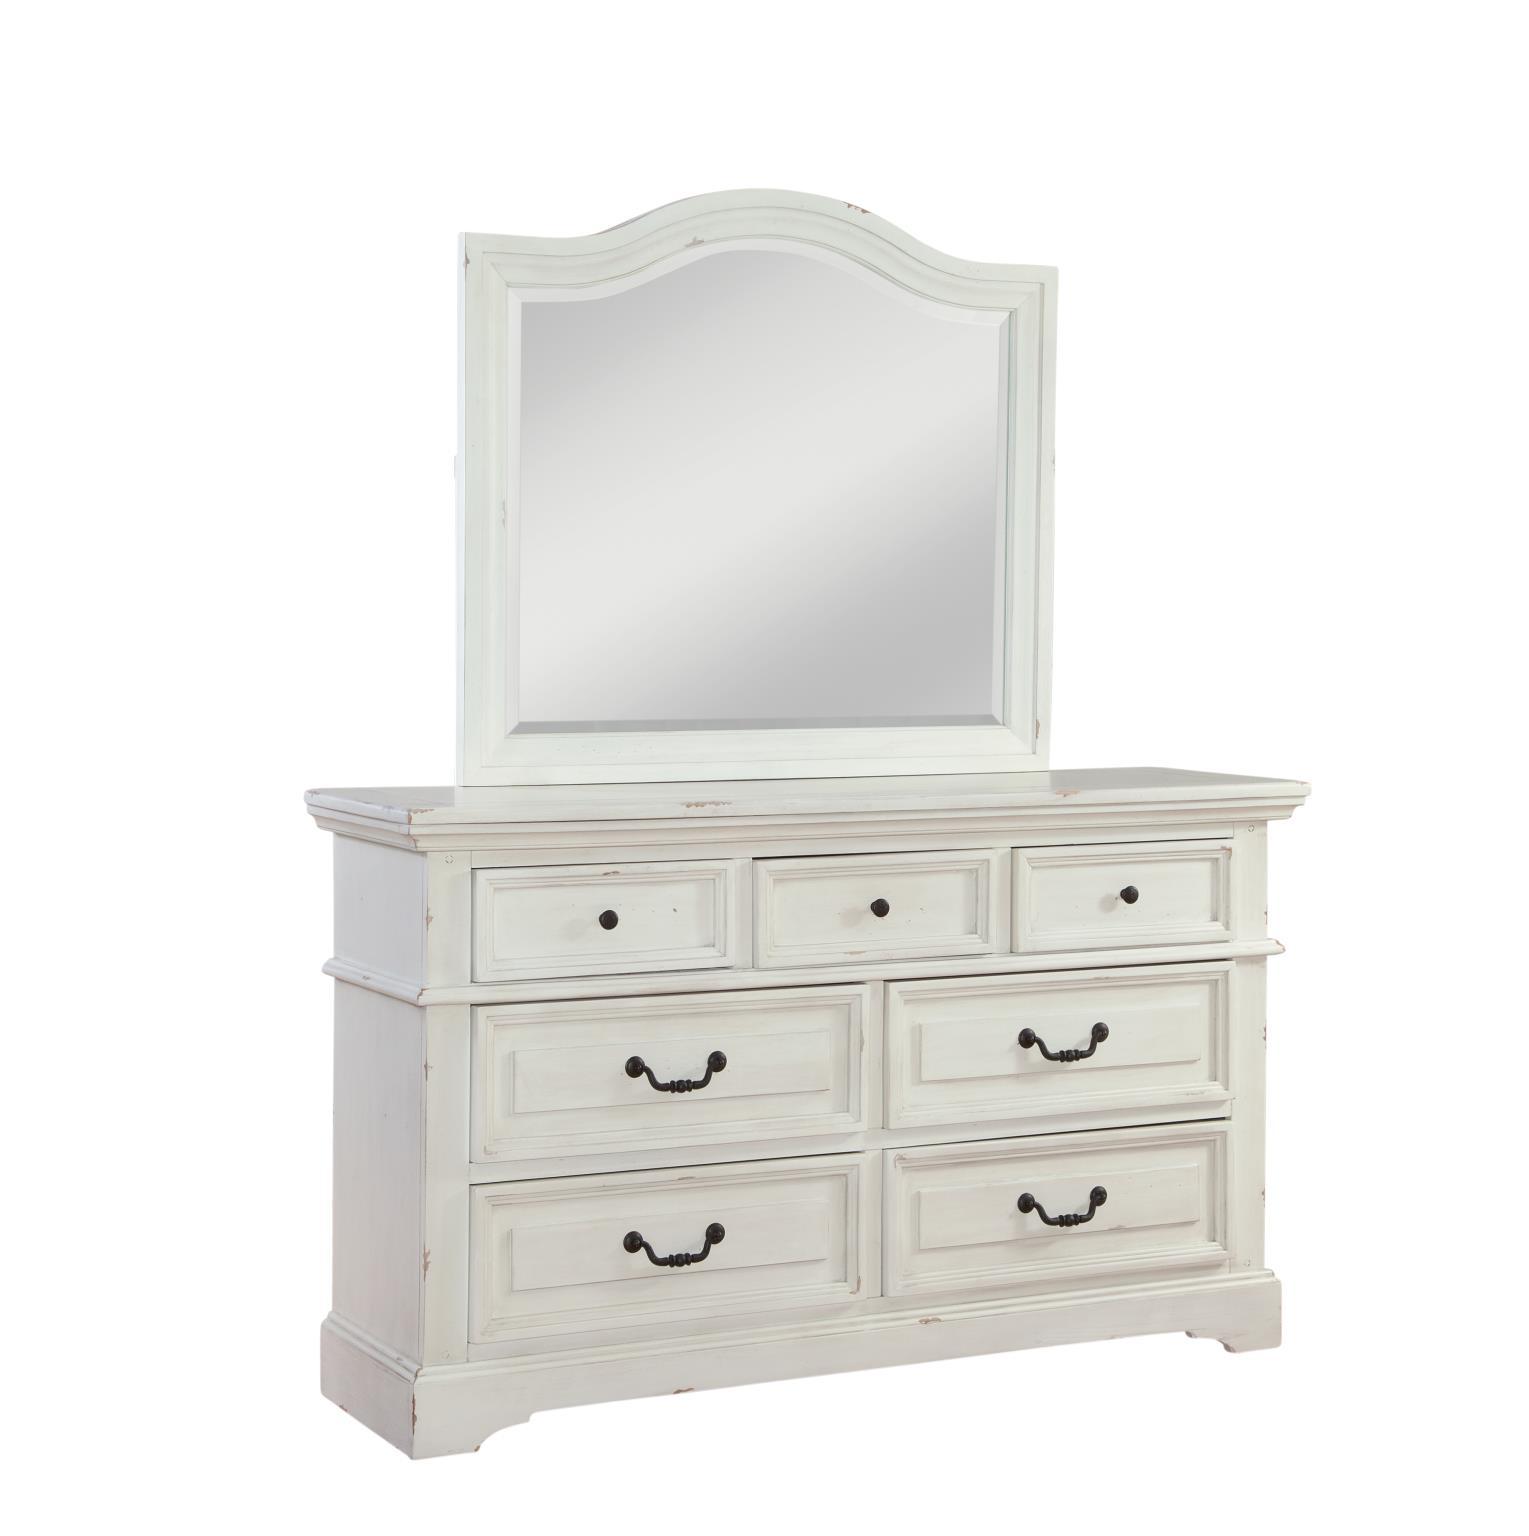 Classic, Traditional Dresser With Mirror 7810 STONEBROOK 7810-TDLM in Antique White 